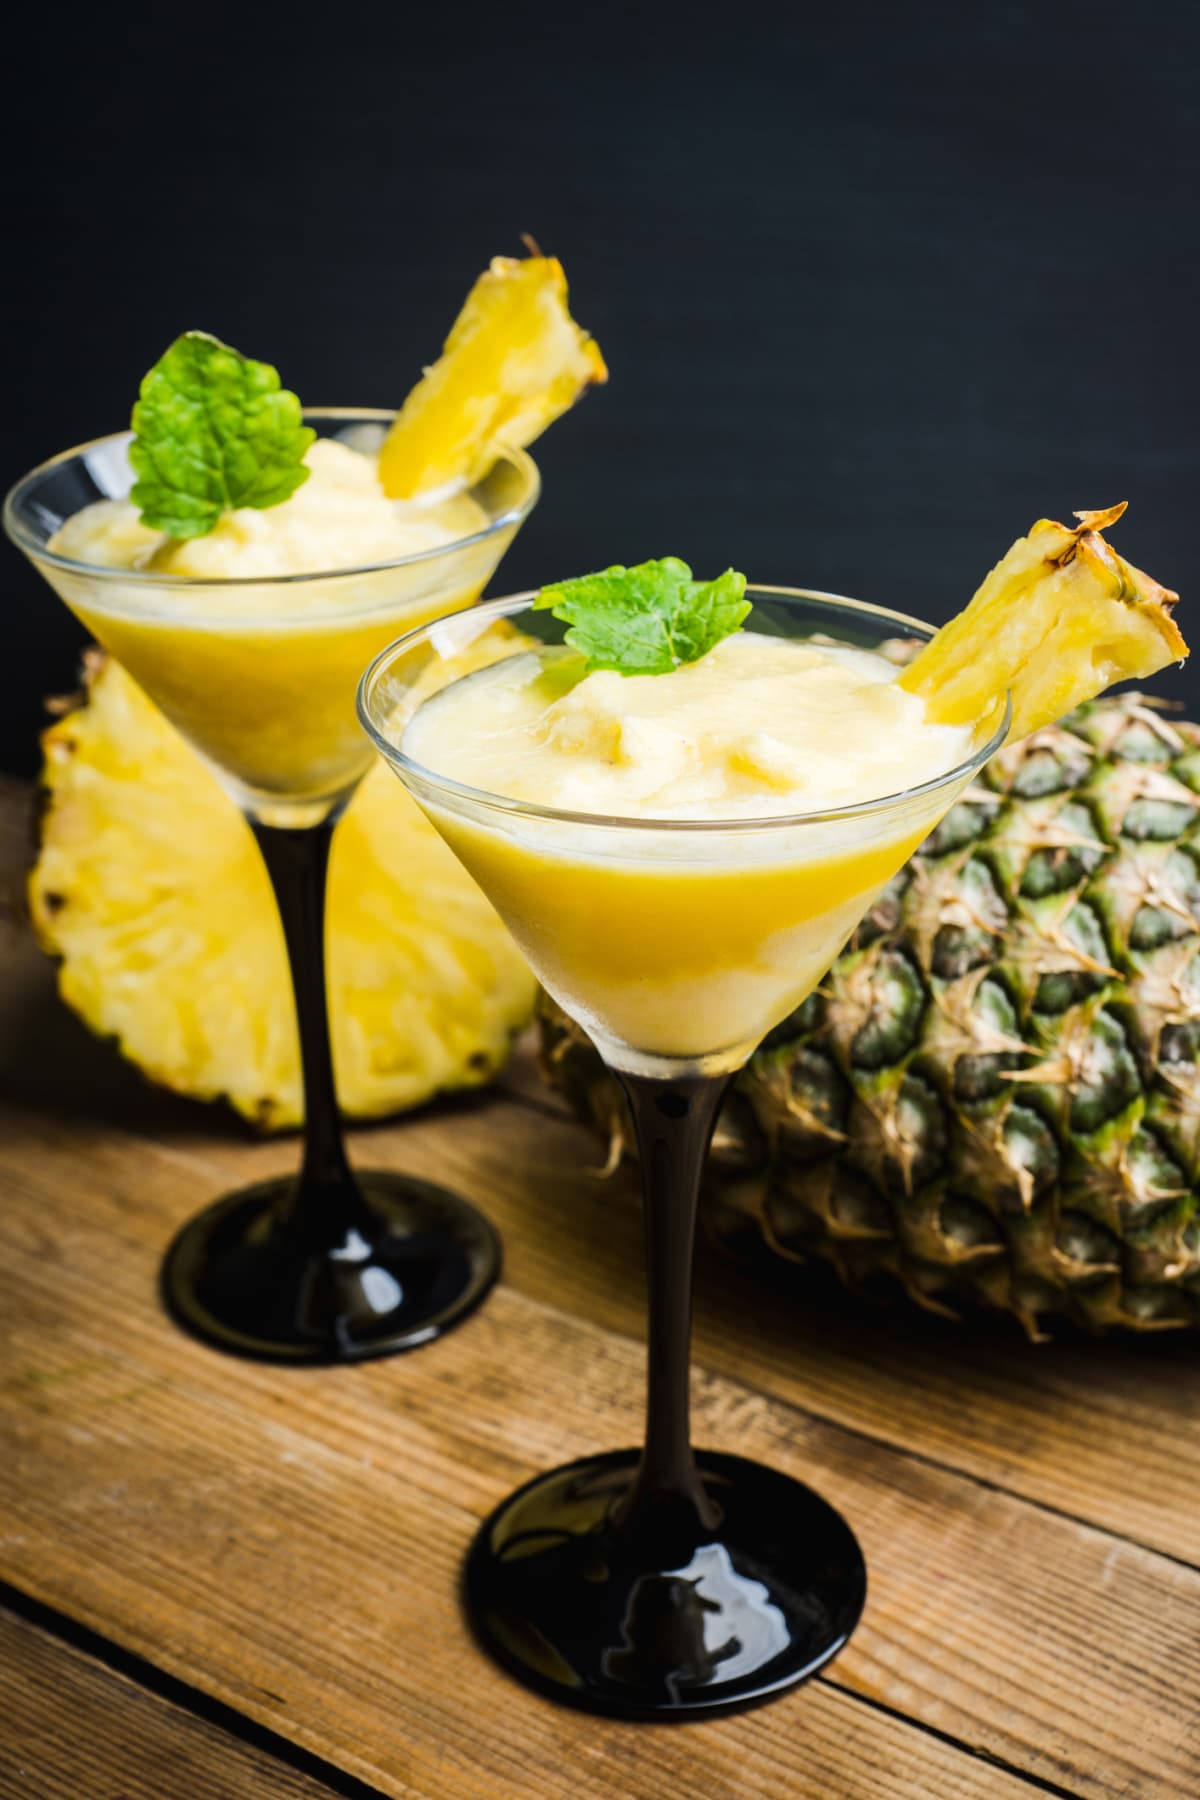 Pineapple margarita cocktail. Summer refreshing tropical drink with pineapple juice and tequila